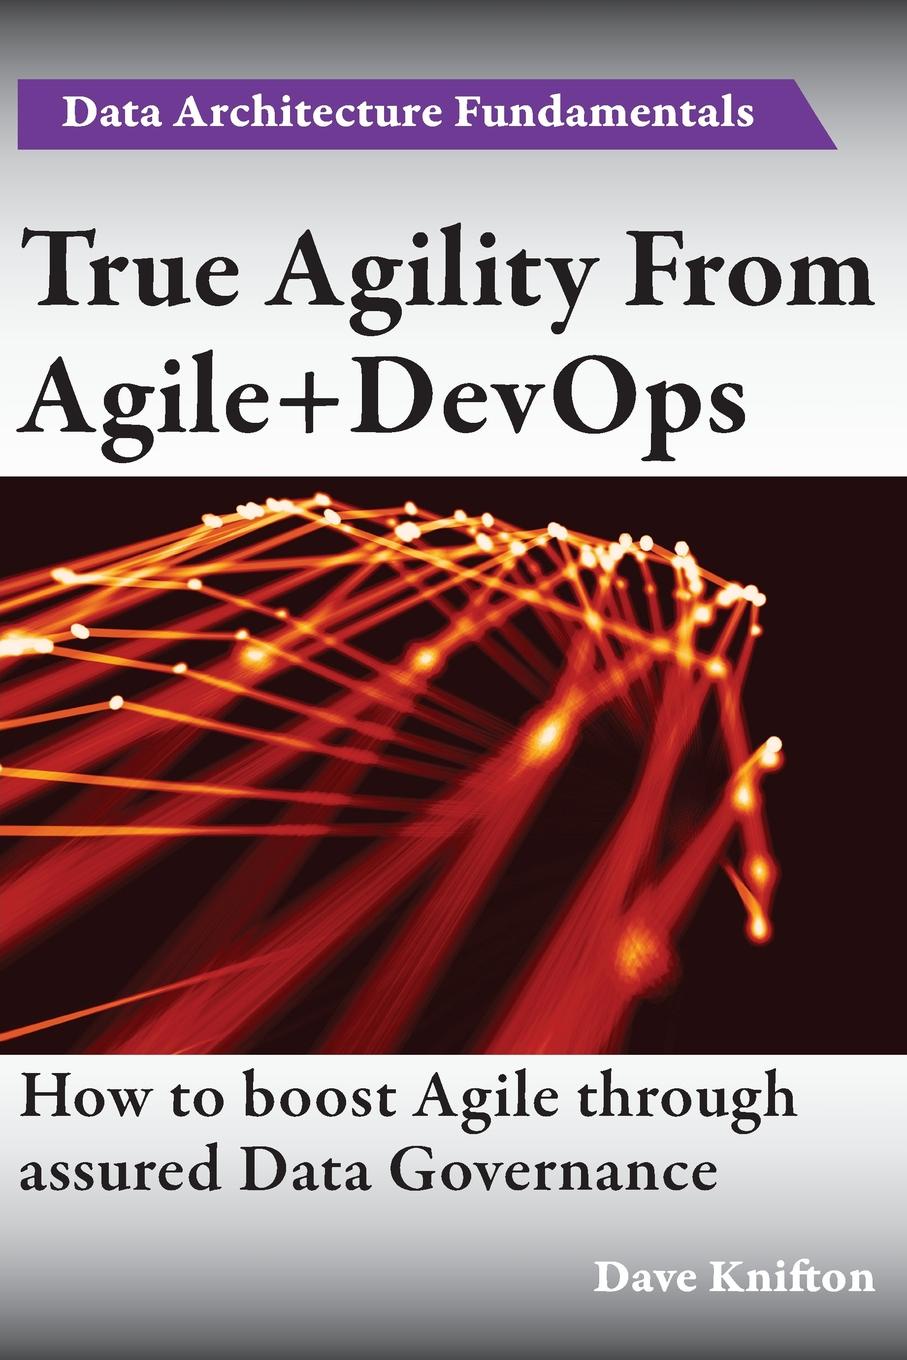 фото True Agility From Agile+DevOps. Assuring Data Governance And Boosting Agility